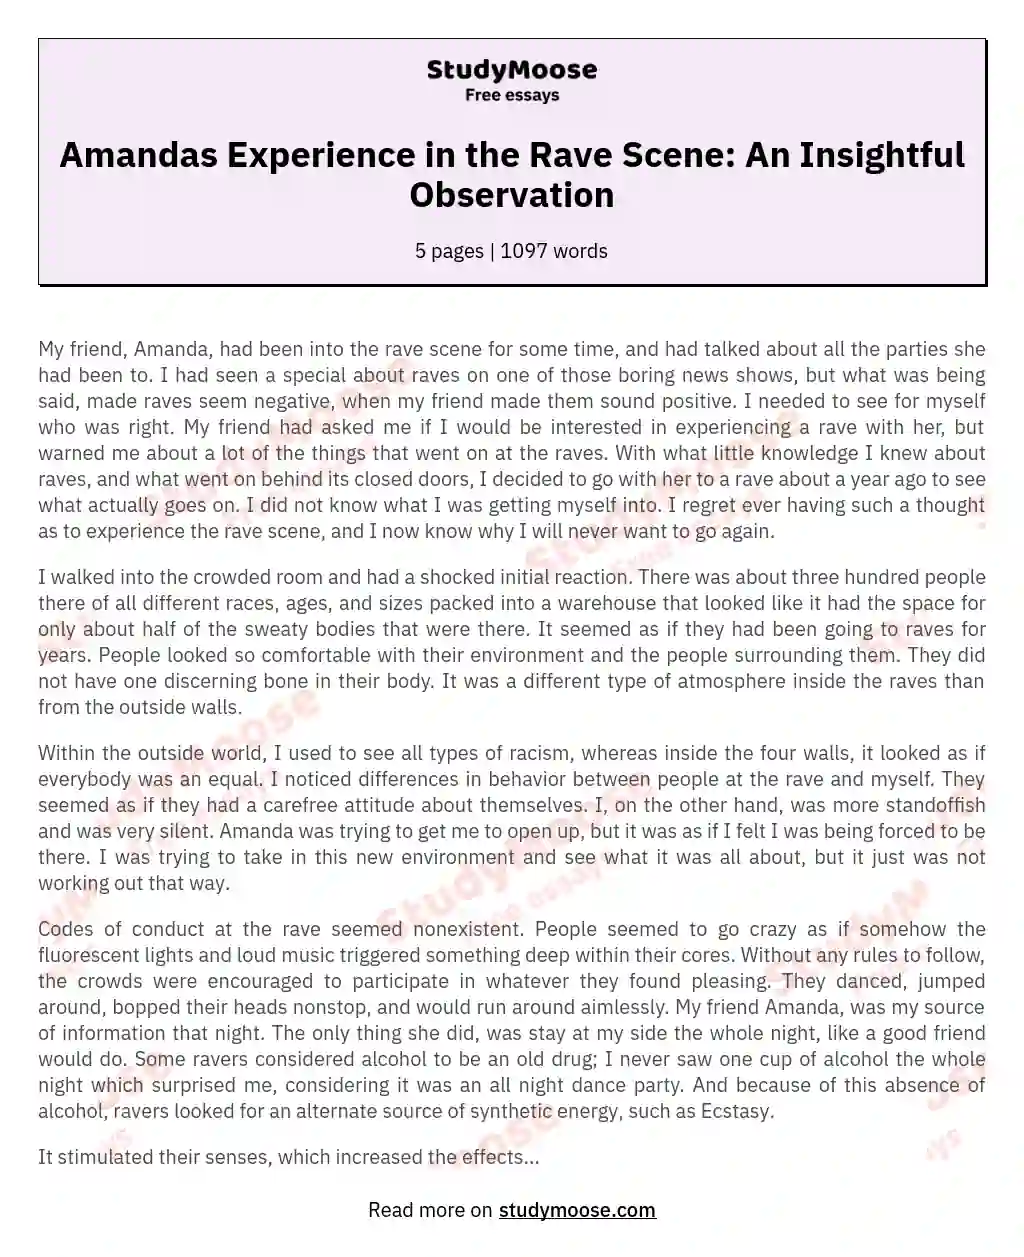 Amandas Experience in the Rave Scene: An Insightful Observation essay